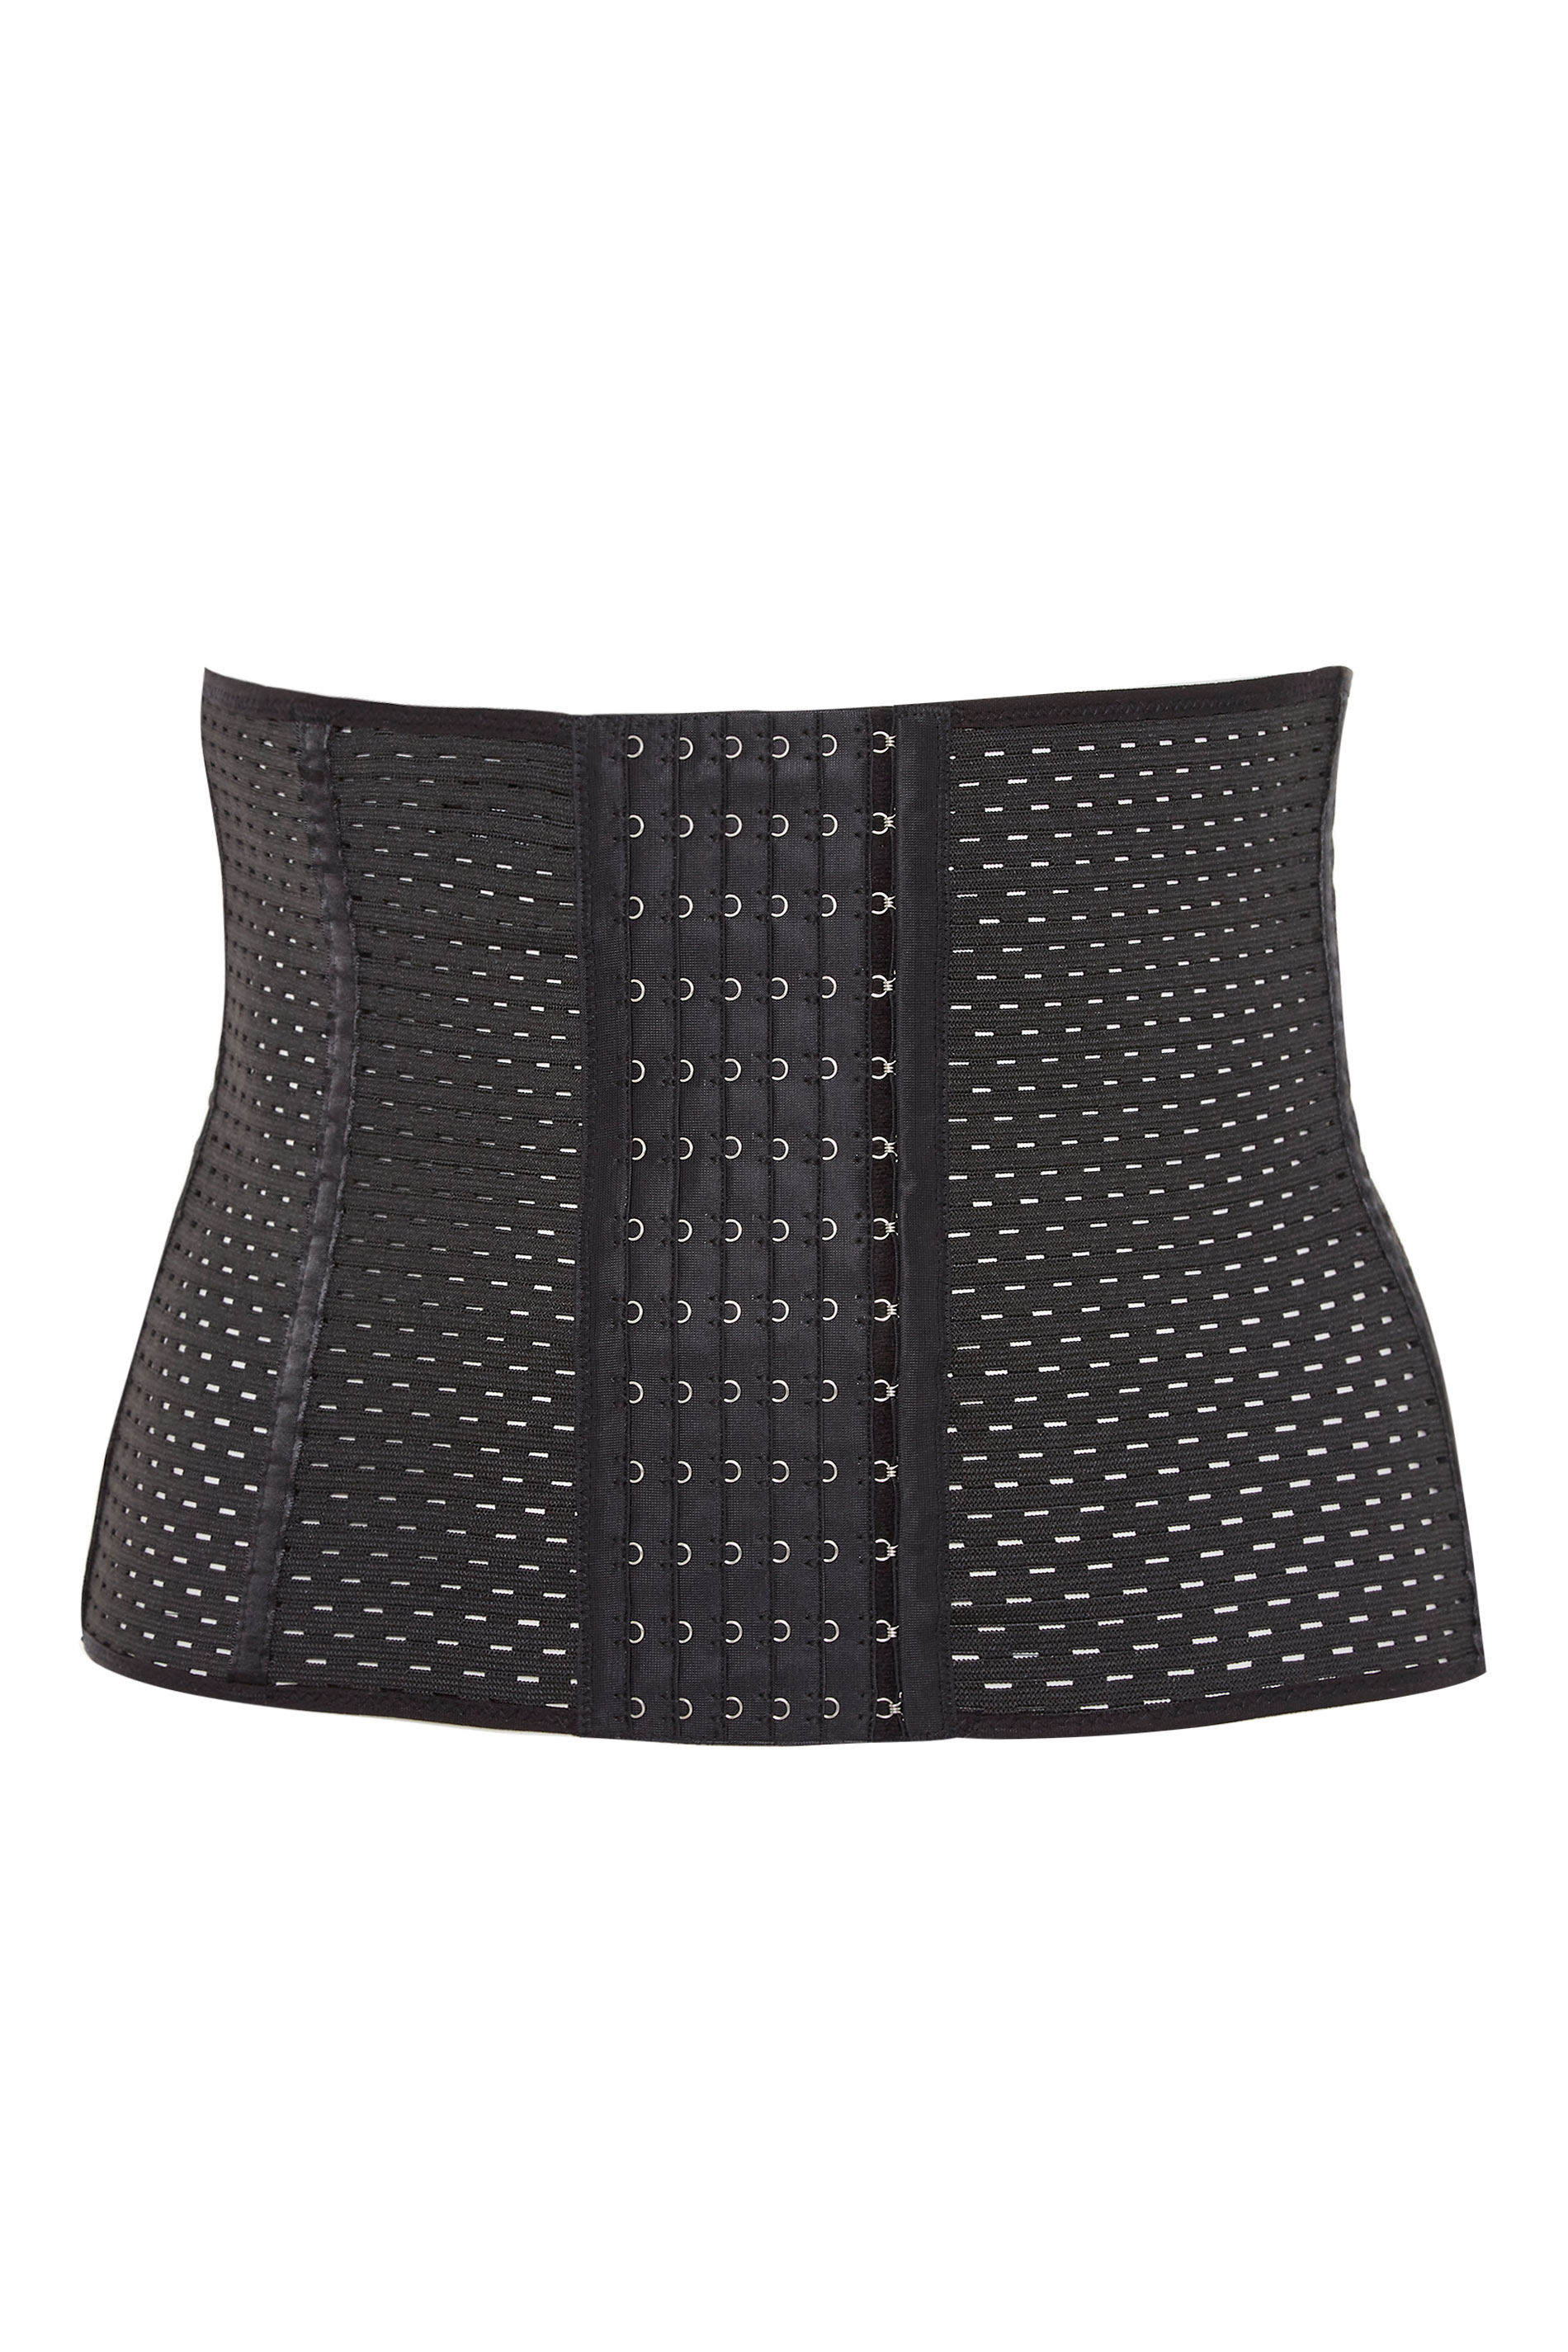 Plus Size Black Textured Mesh Hook & Eye Control Belly Band | Yours Clothing 2